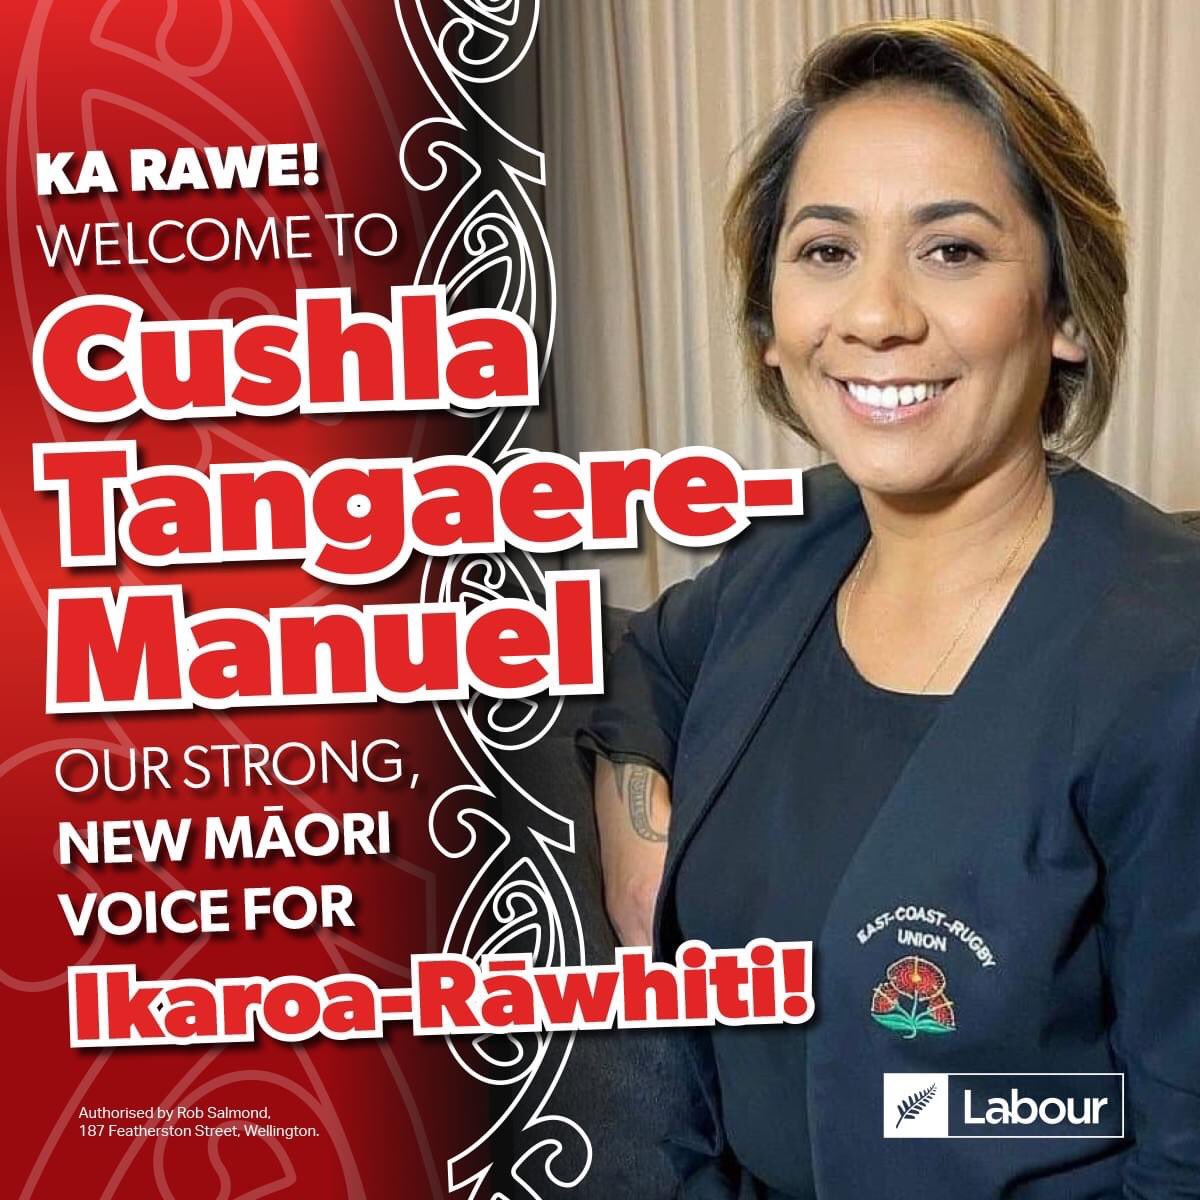 We mihi to Cushla Tangaere-Manuel, Labour's 2023 #IkaroaRāwhiti candidate! “Above all, running in this election is about serving our people. Ikaroa-Rāwhiti deserves a strong candidate in order to deliver much-needed resources, esp as we recover from Cyclone Gabrielle.” #nzpol